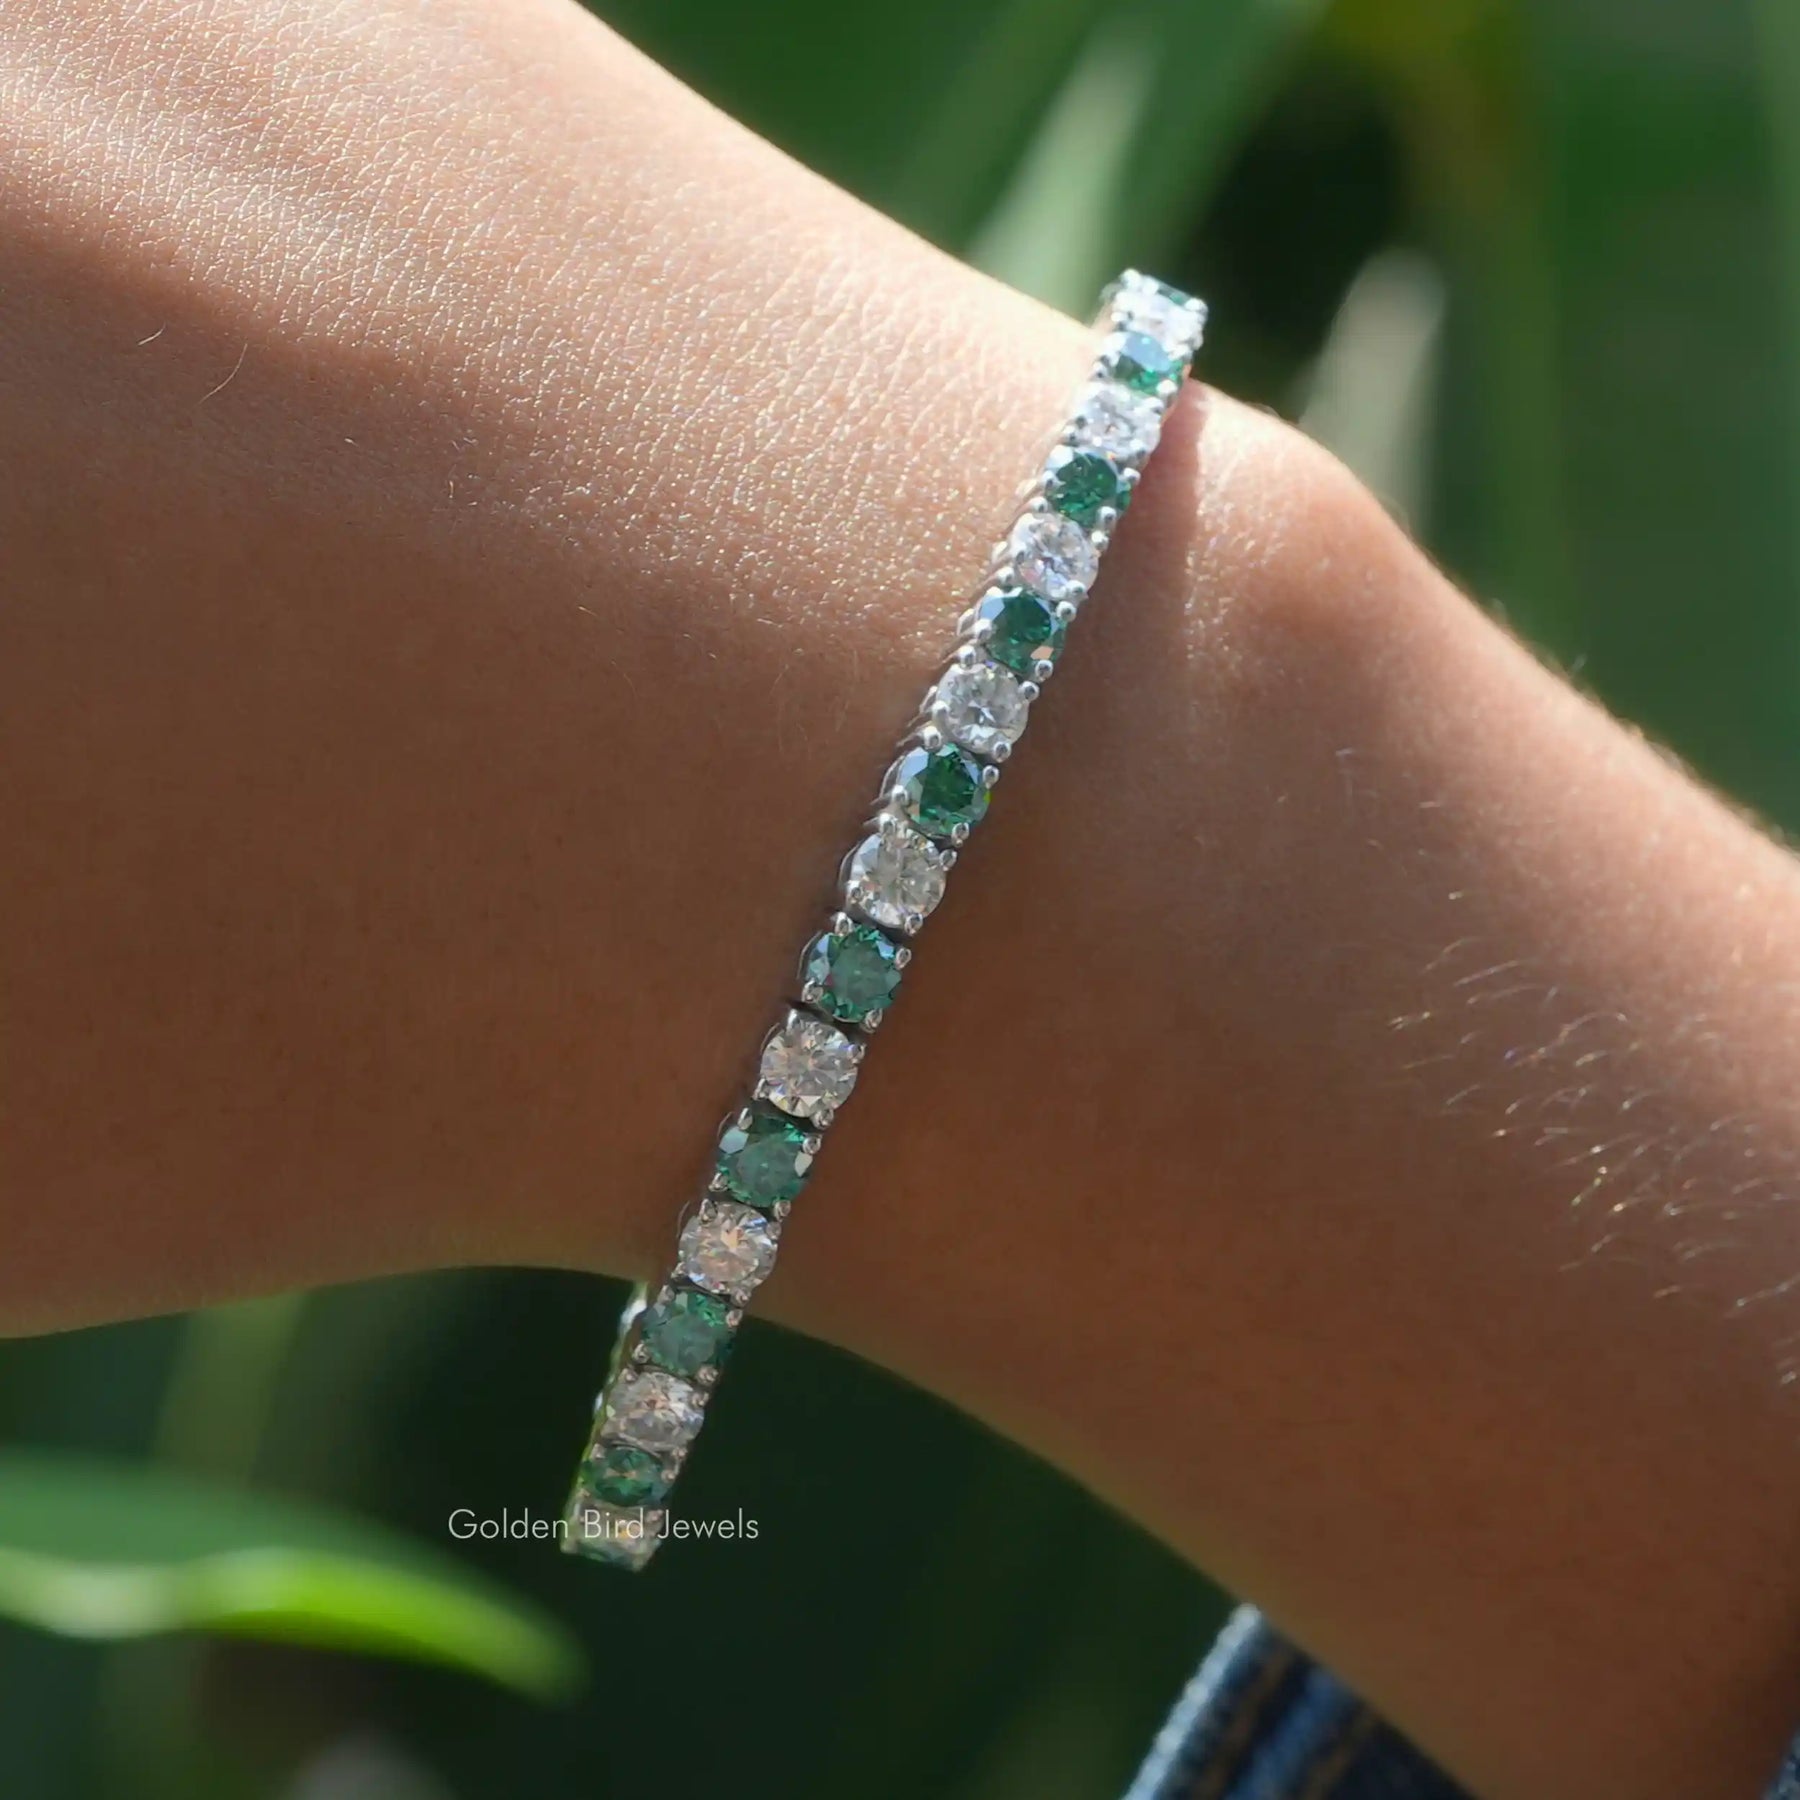 [Moissanite round cut tennis bracelet made of green and colorless round cut stones]-[Golden Bird  Jewels]